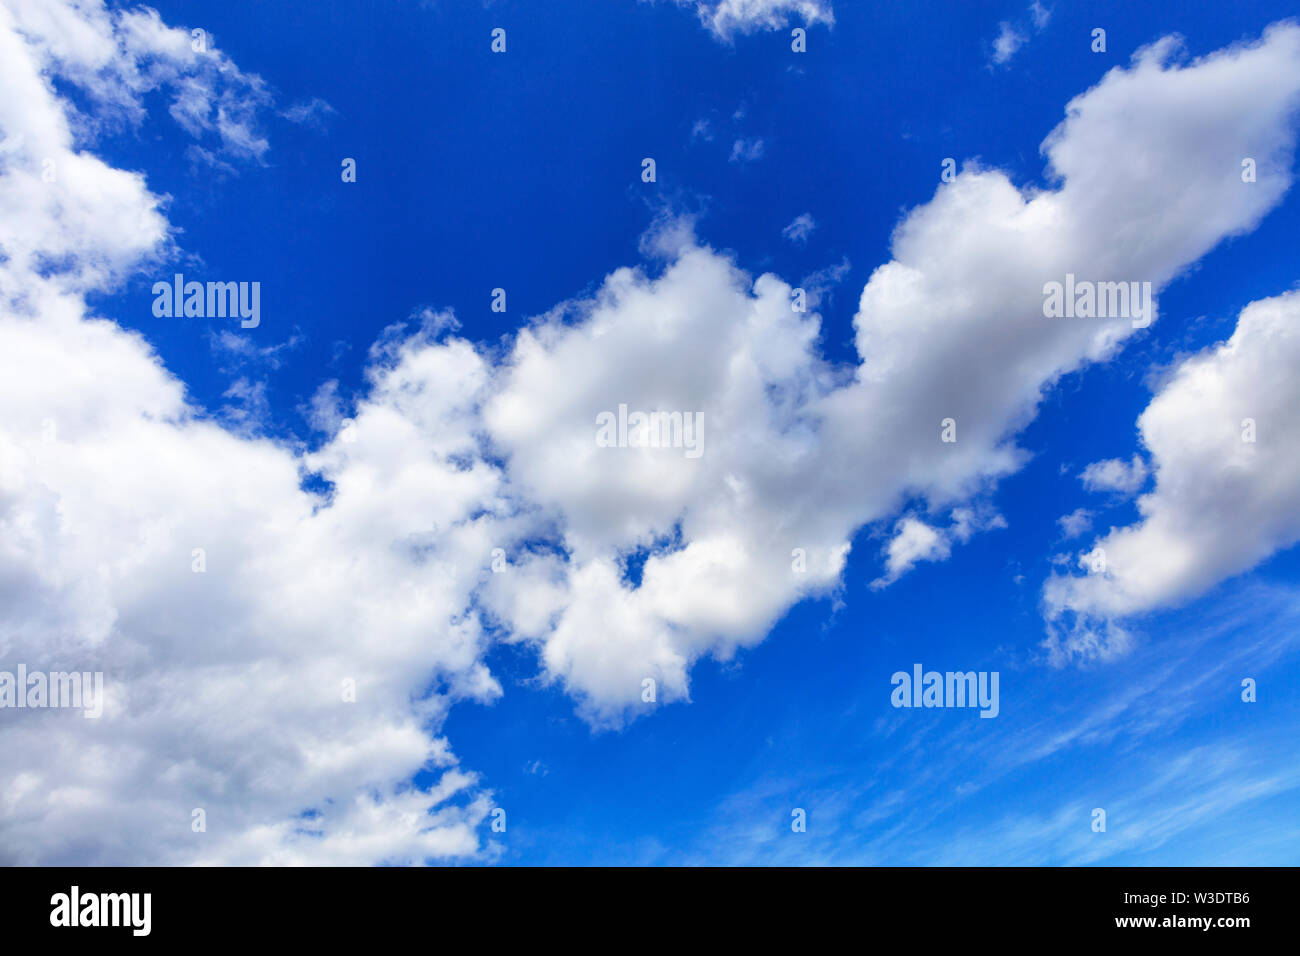 In the blue sky white fluffy clouds strive skyward, dividing the picture diagonally. Stock Photo